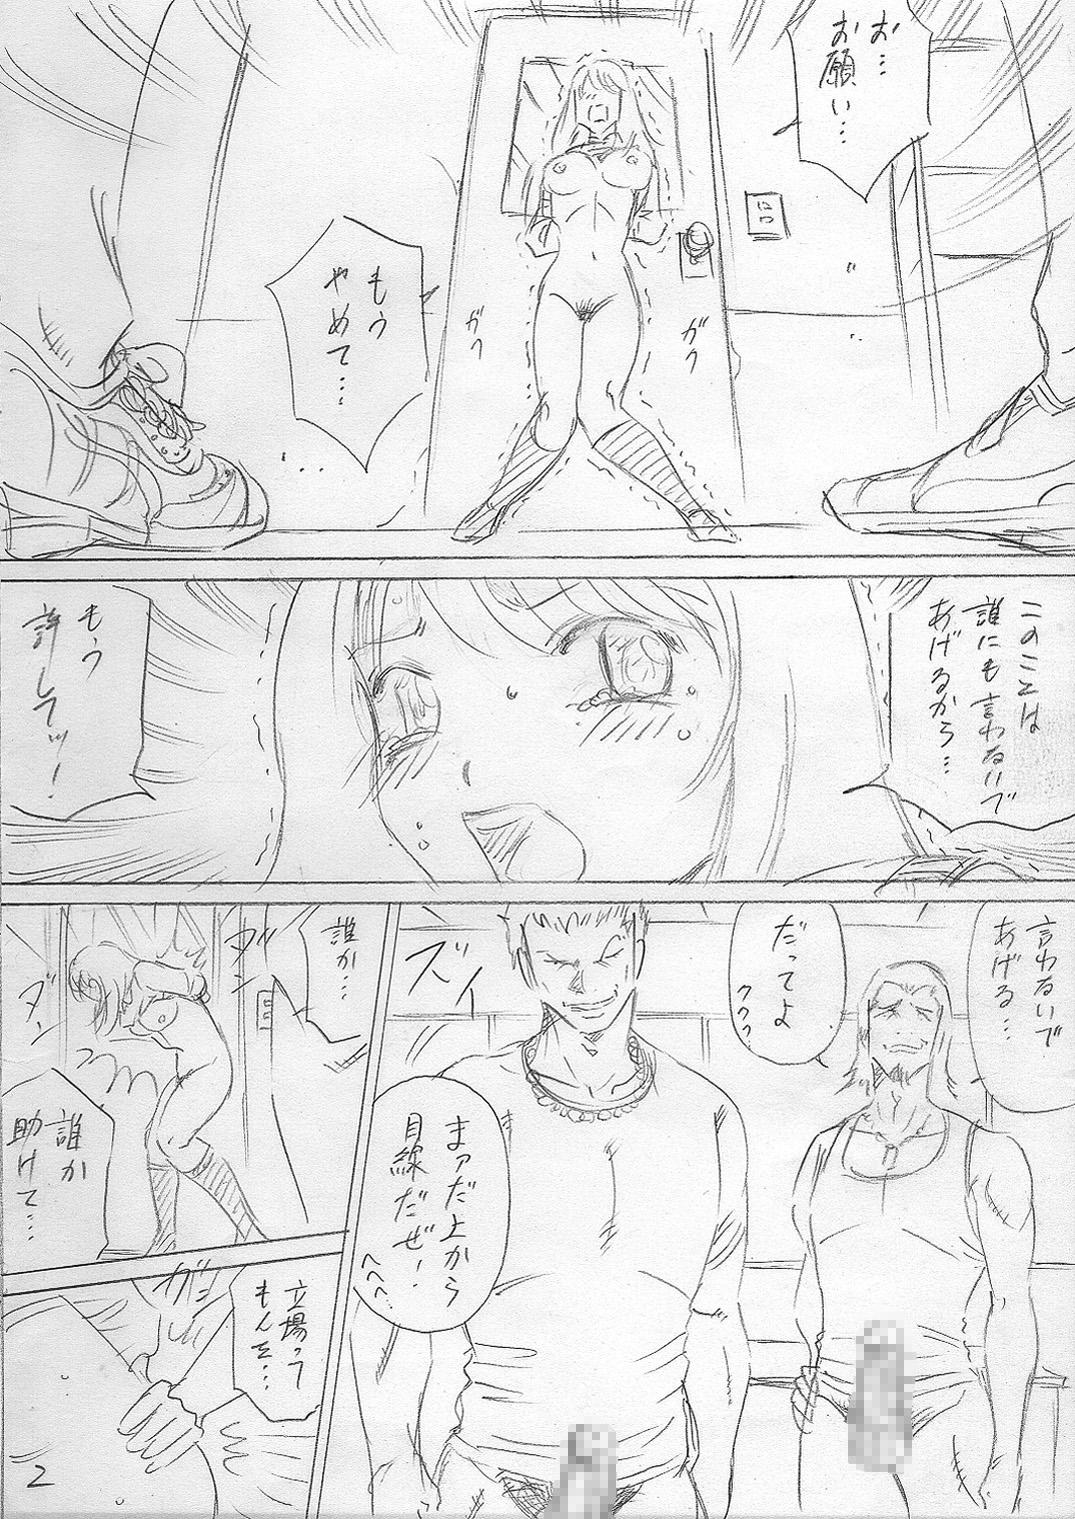 Family 落ちていく日（後編） Granny - Page 2